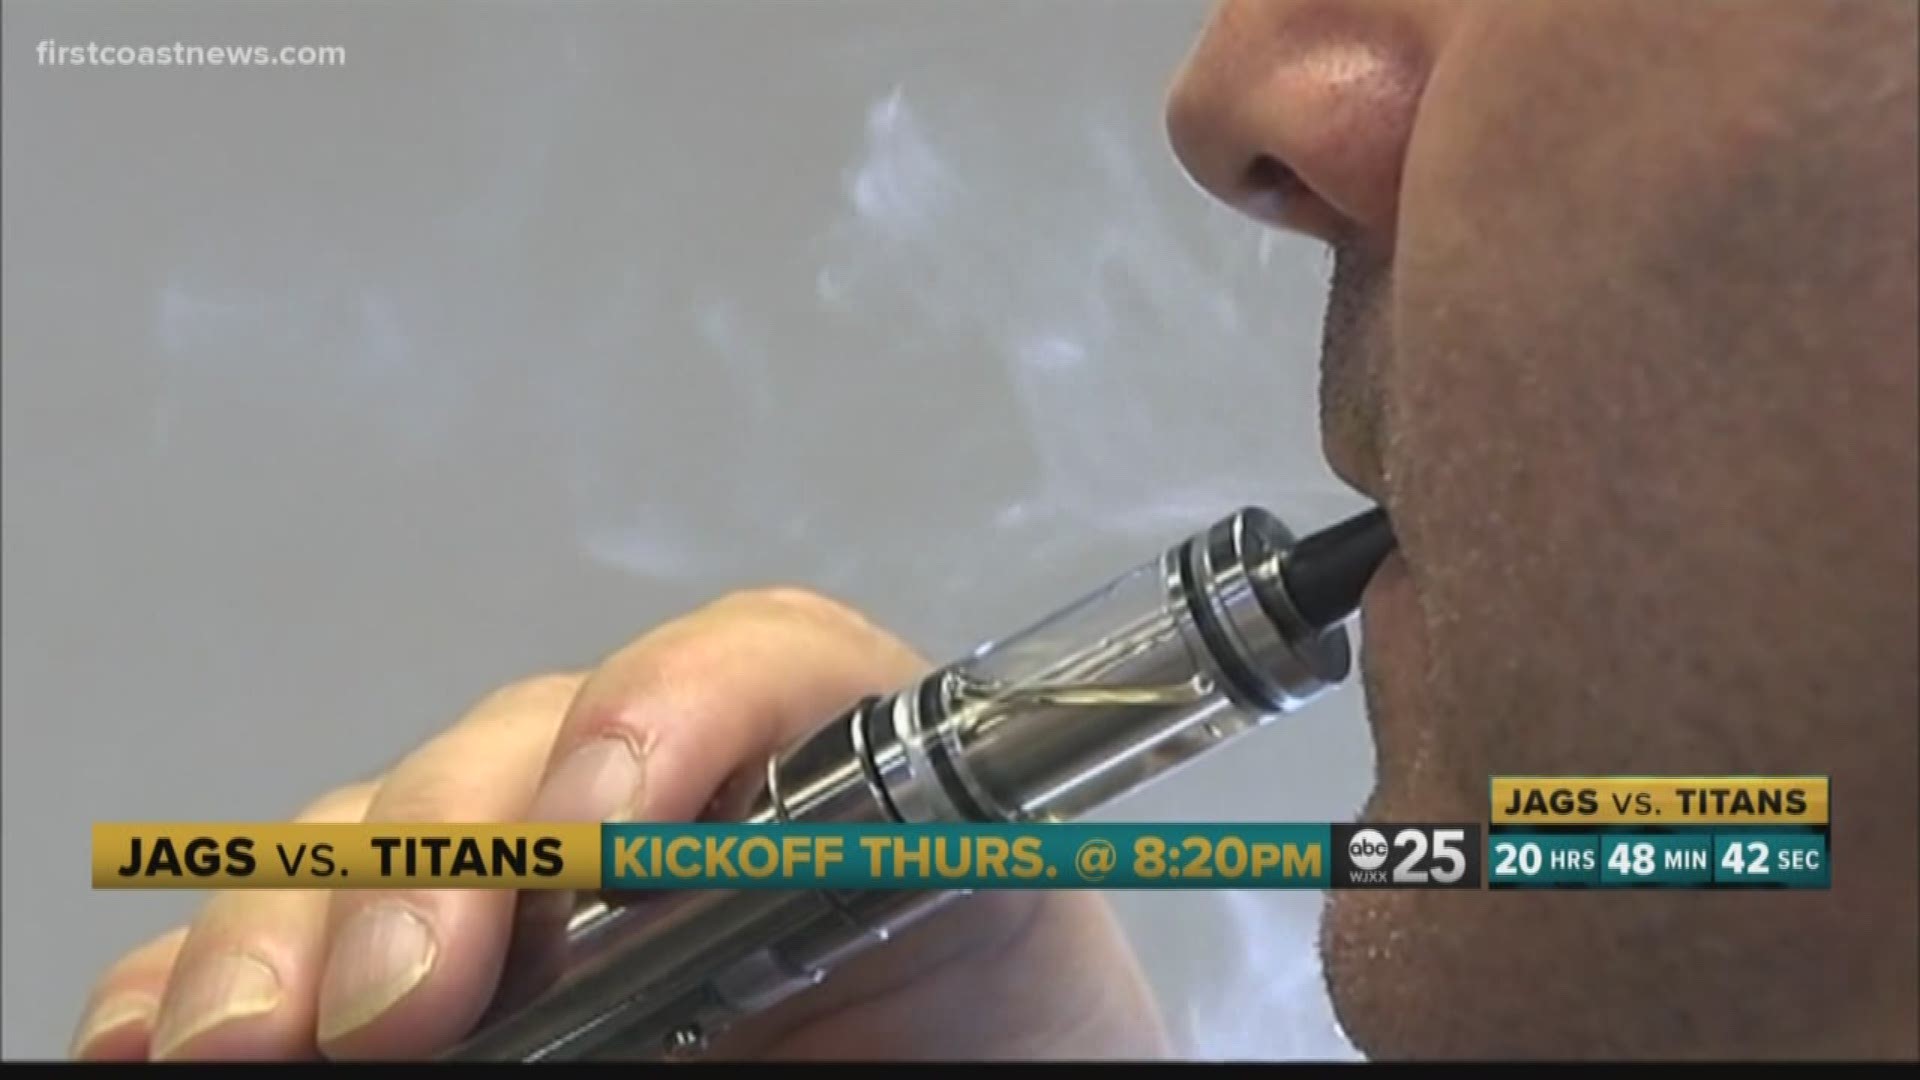 Employees at Blackhat Vapor Company in Jacksonville say their products are safe and overseen by the FDA.